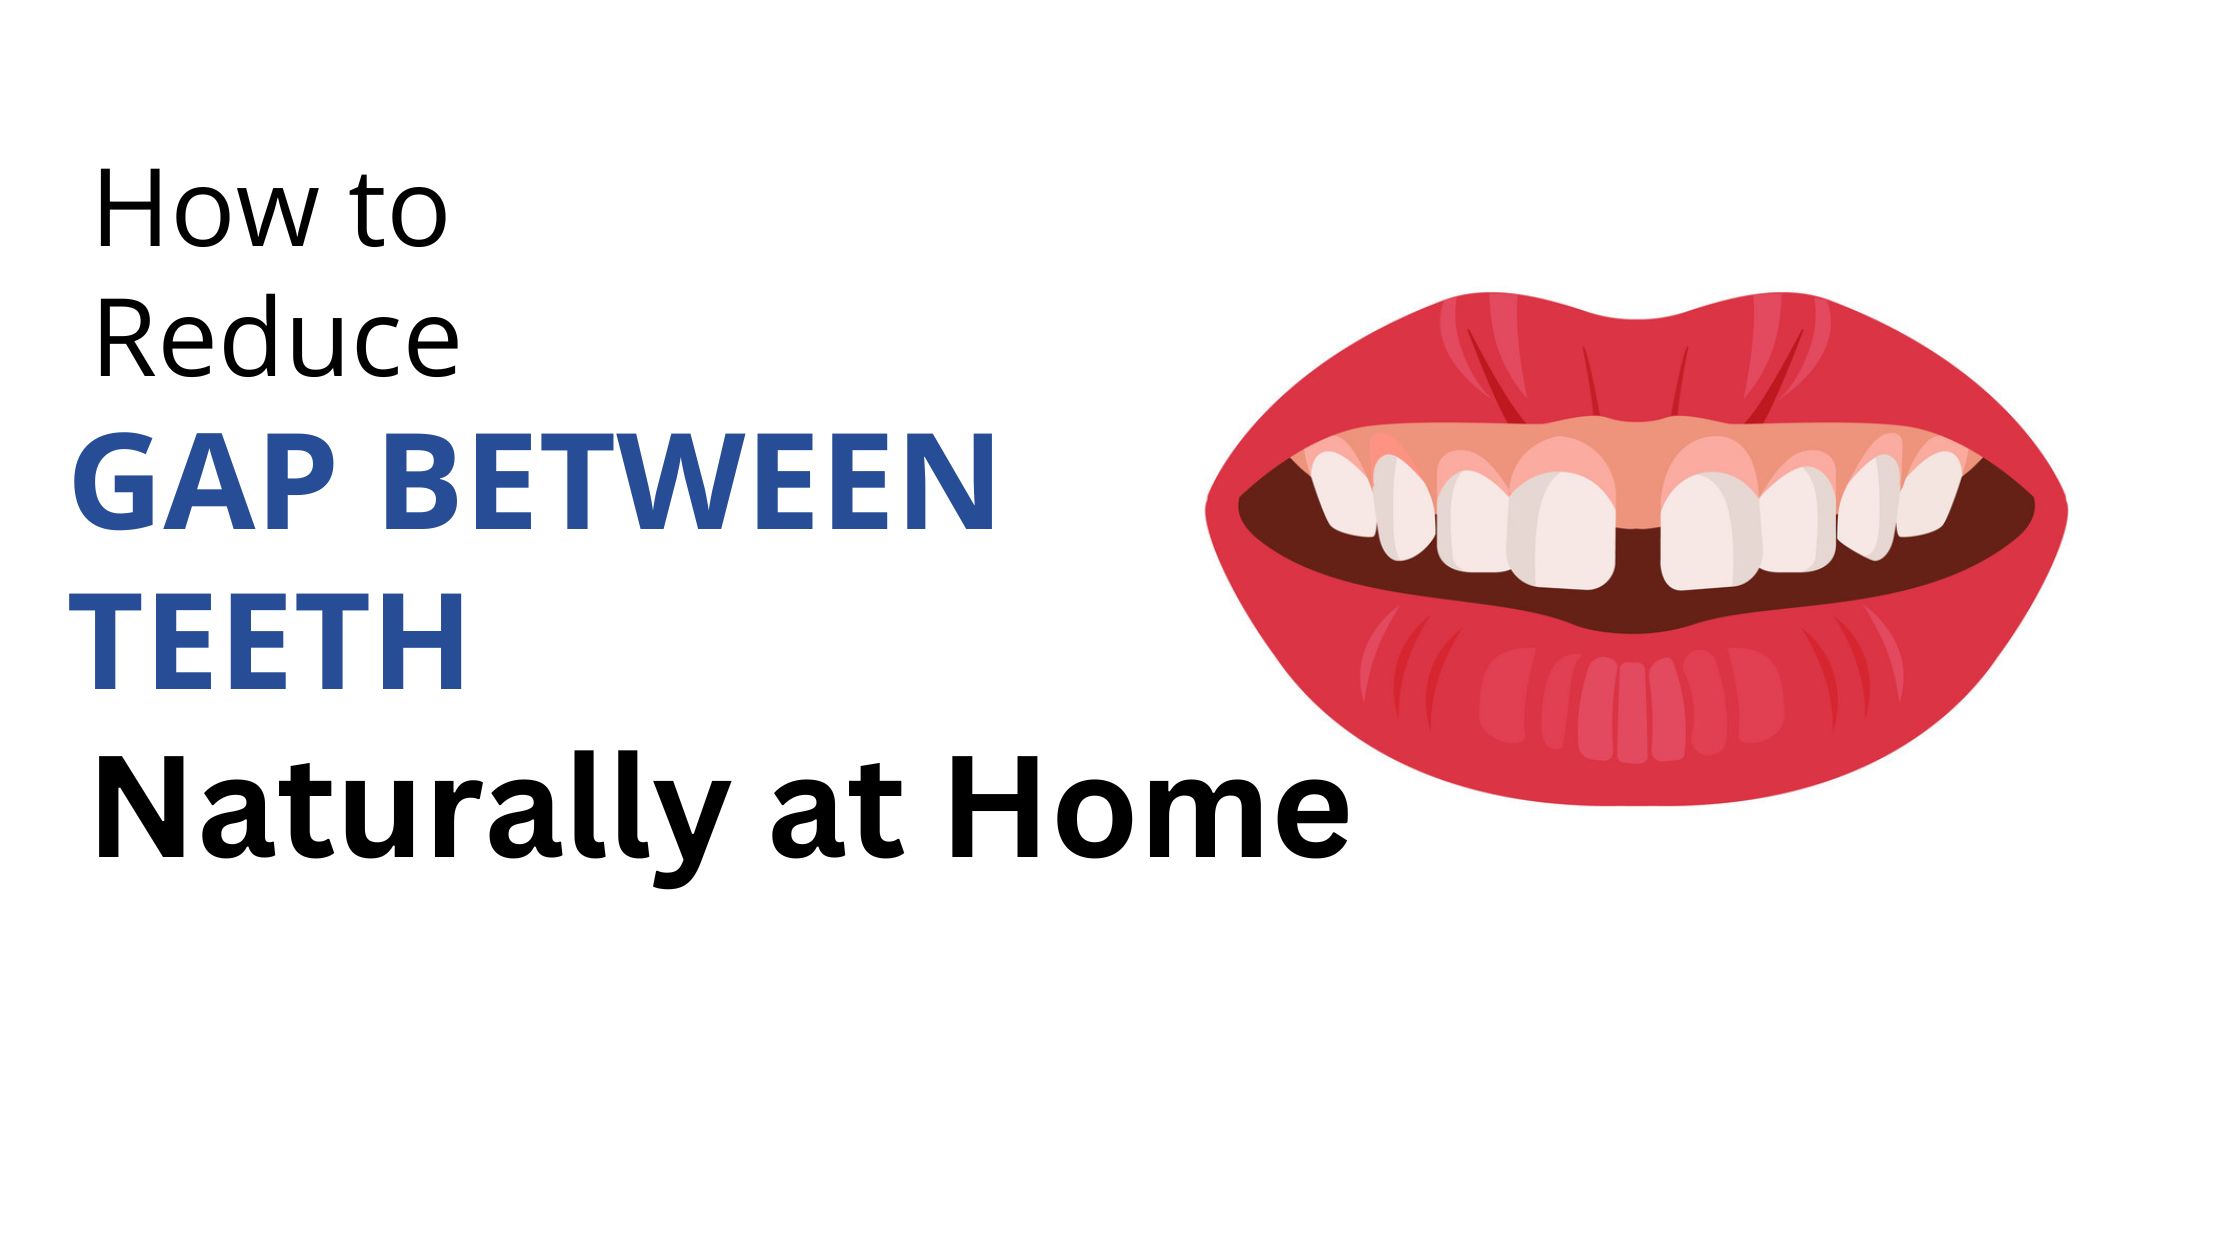 How to Reduce Gap Between Teeth Naturally at Home?